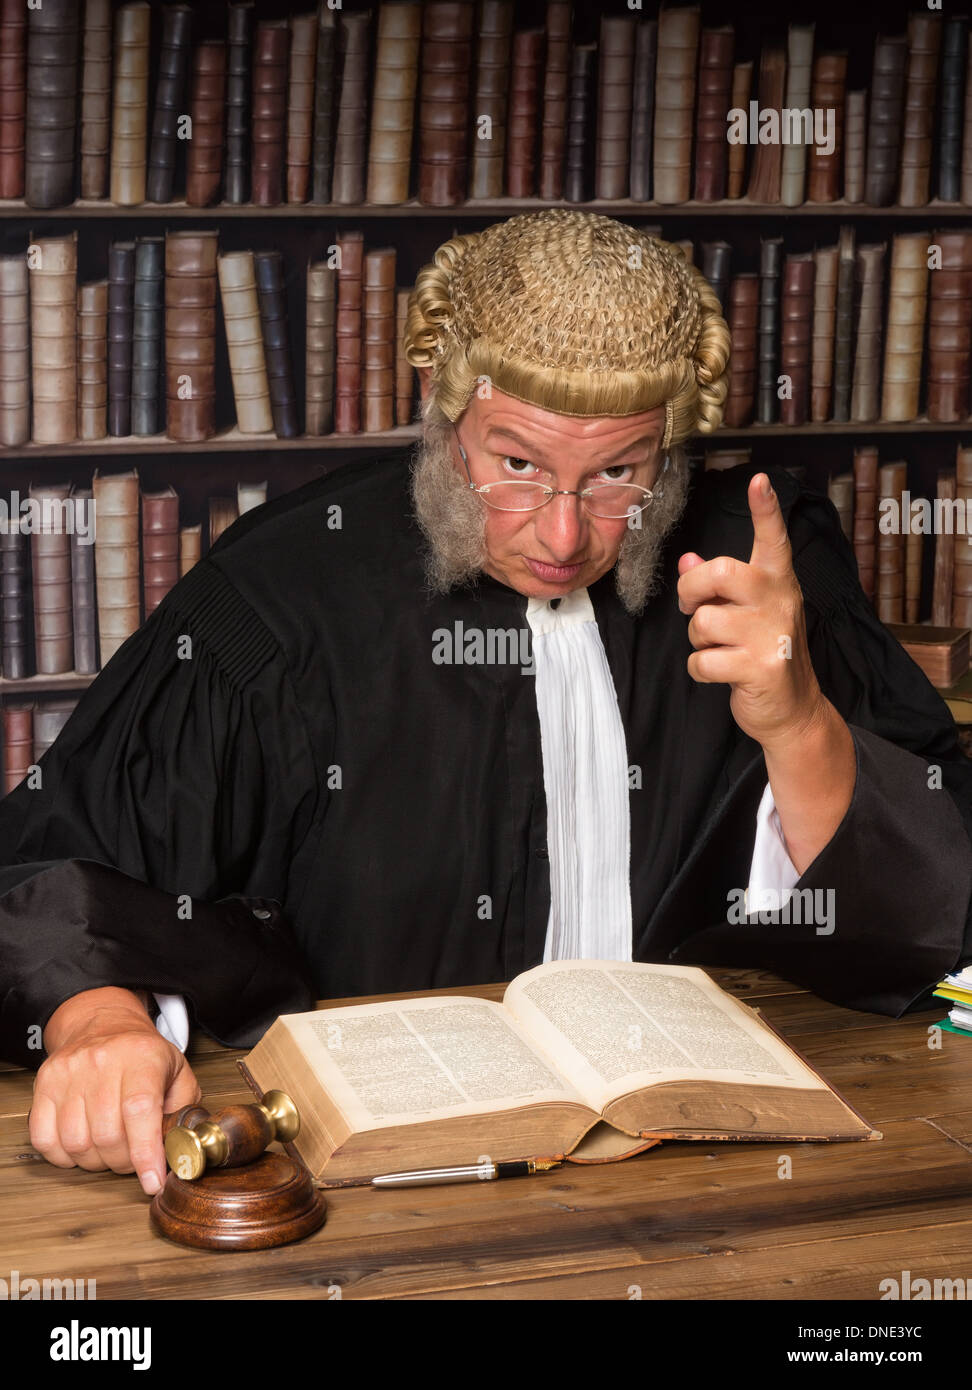 Judge with wig and gavel holding a speech to the convicted criminal Stock Photo